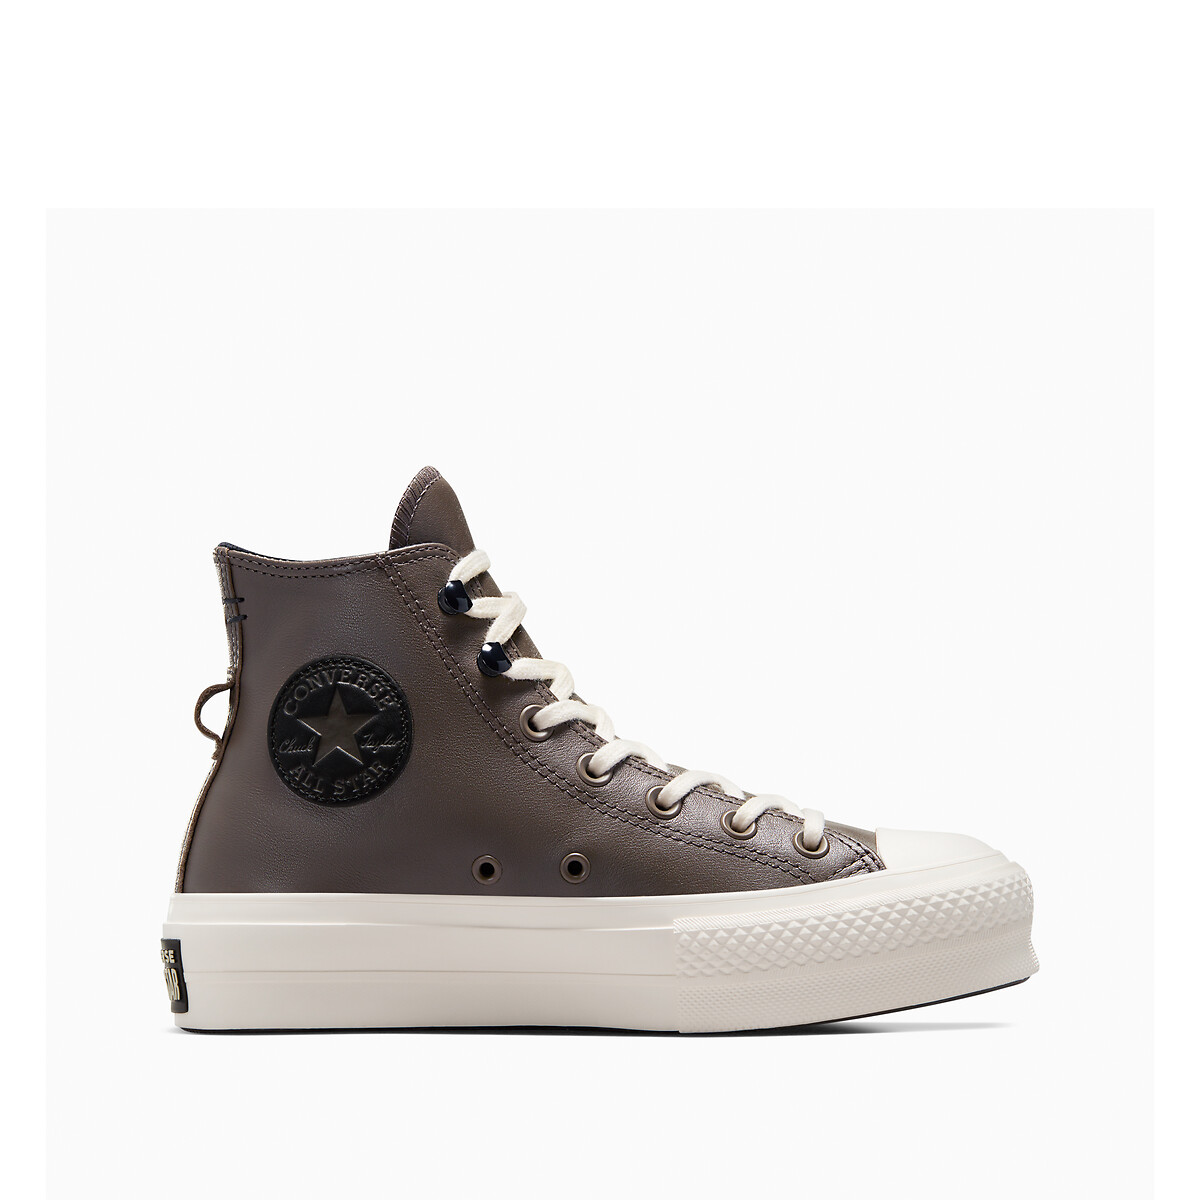 Image of All Star Lift Hi Counter Climate Leather High Top Trainers